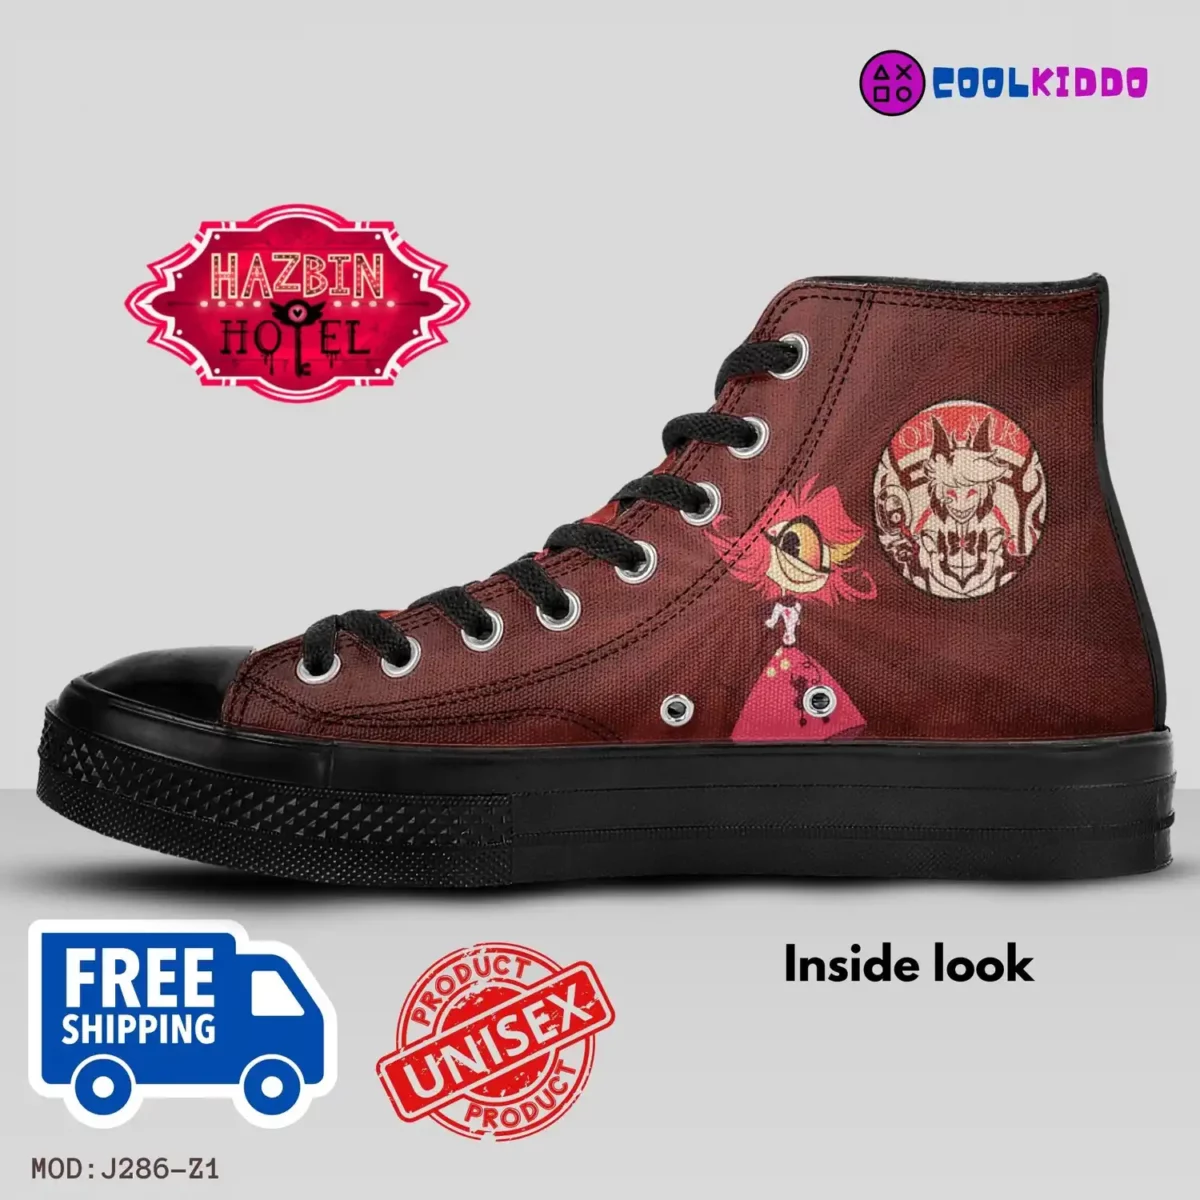 Custom Hazbin Hotel High-Top Canvas Sneakers, Animated Series Inspired Casual Shoes for any season Cool Kiddo 16